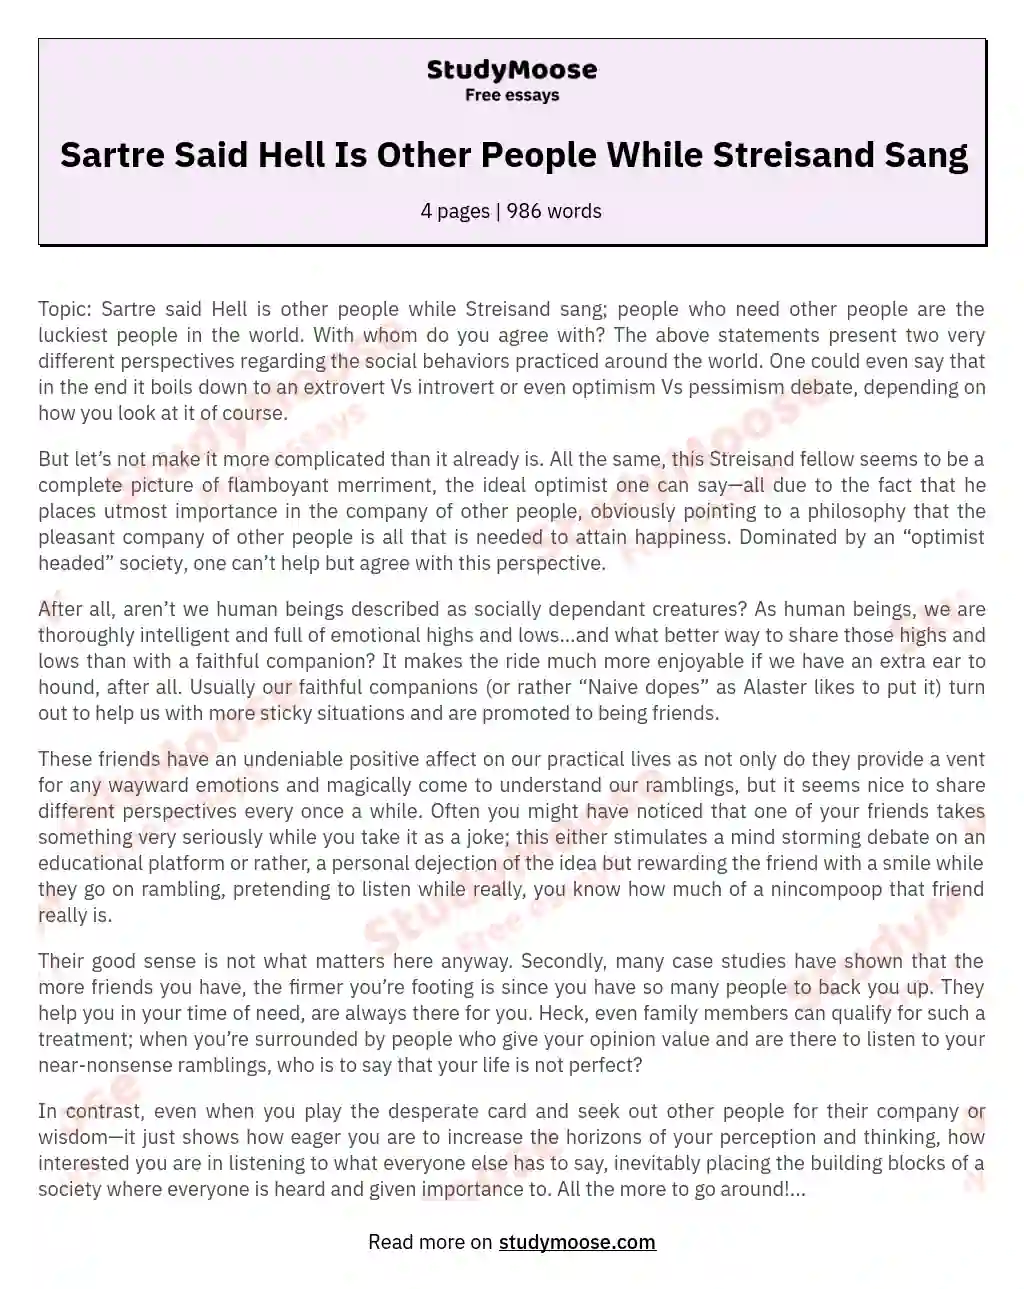 Sartre Said Hell Is Other People While Streisand Sang